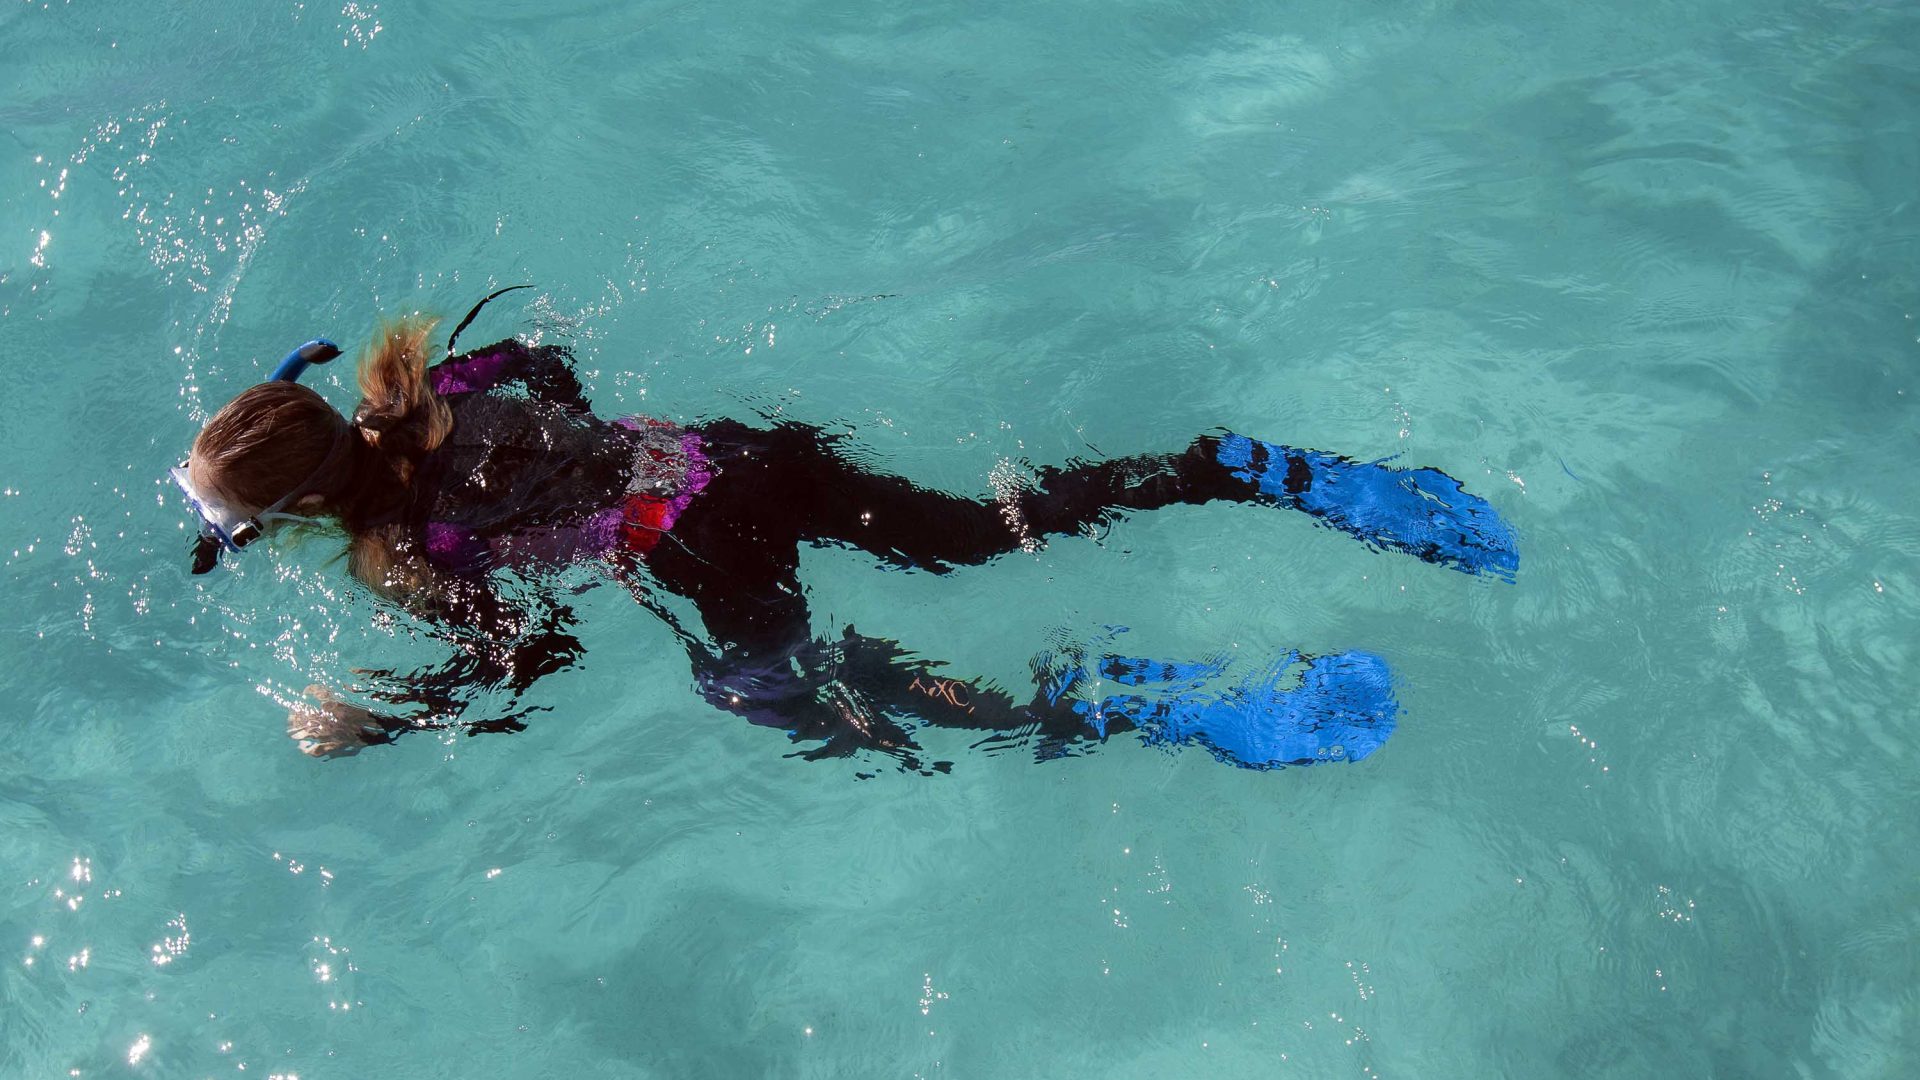 A person snorkelling alone in clear water.